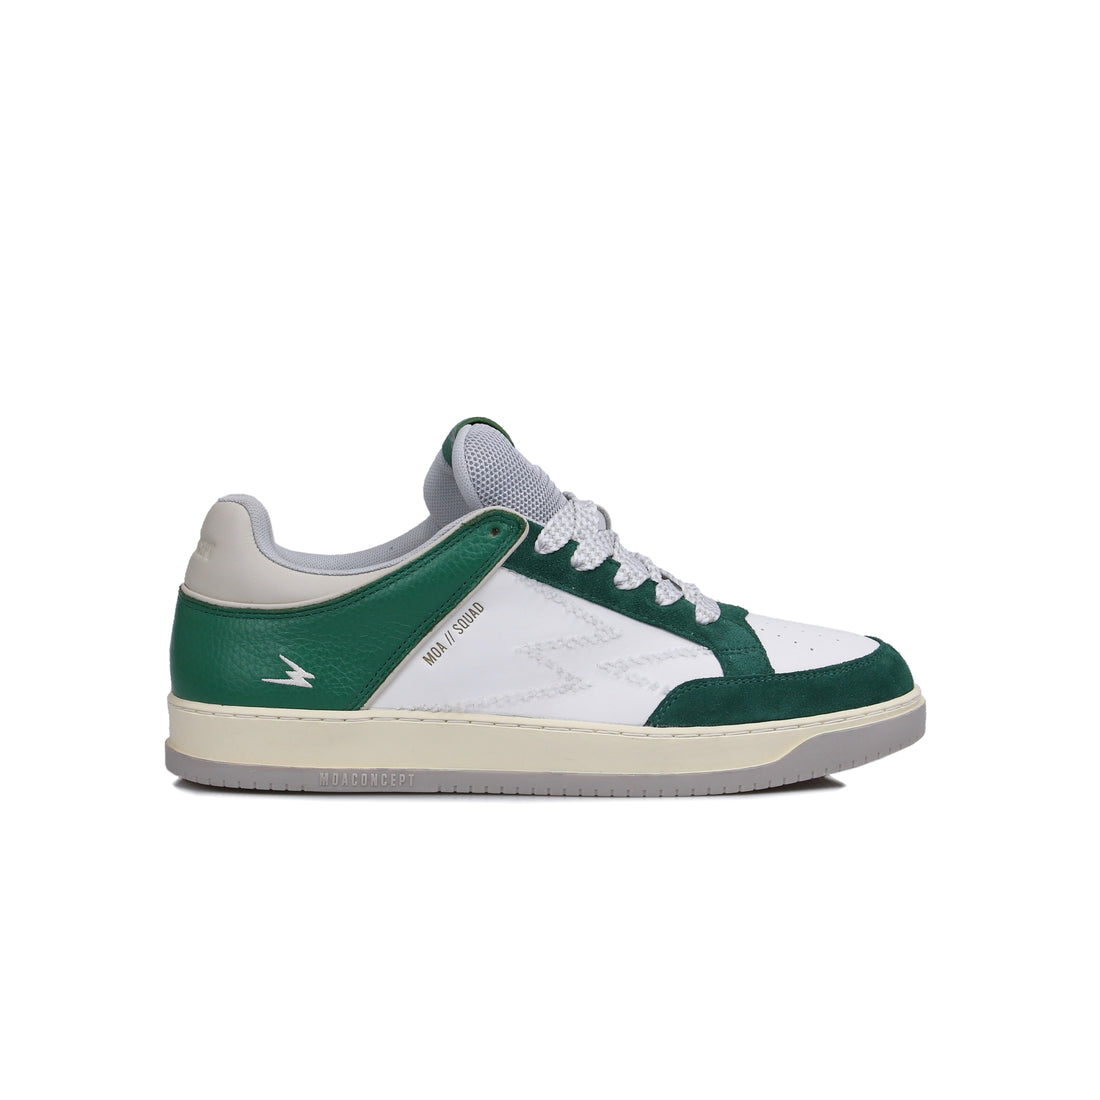 Squad sneaker. Embroidered logo with green details